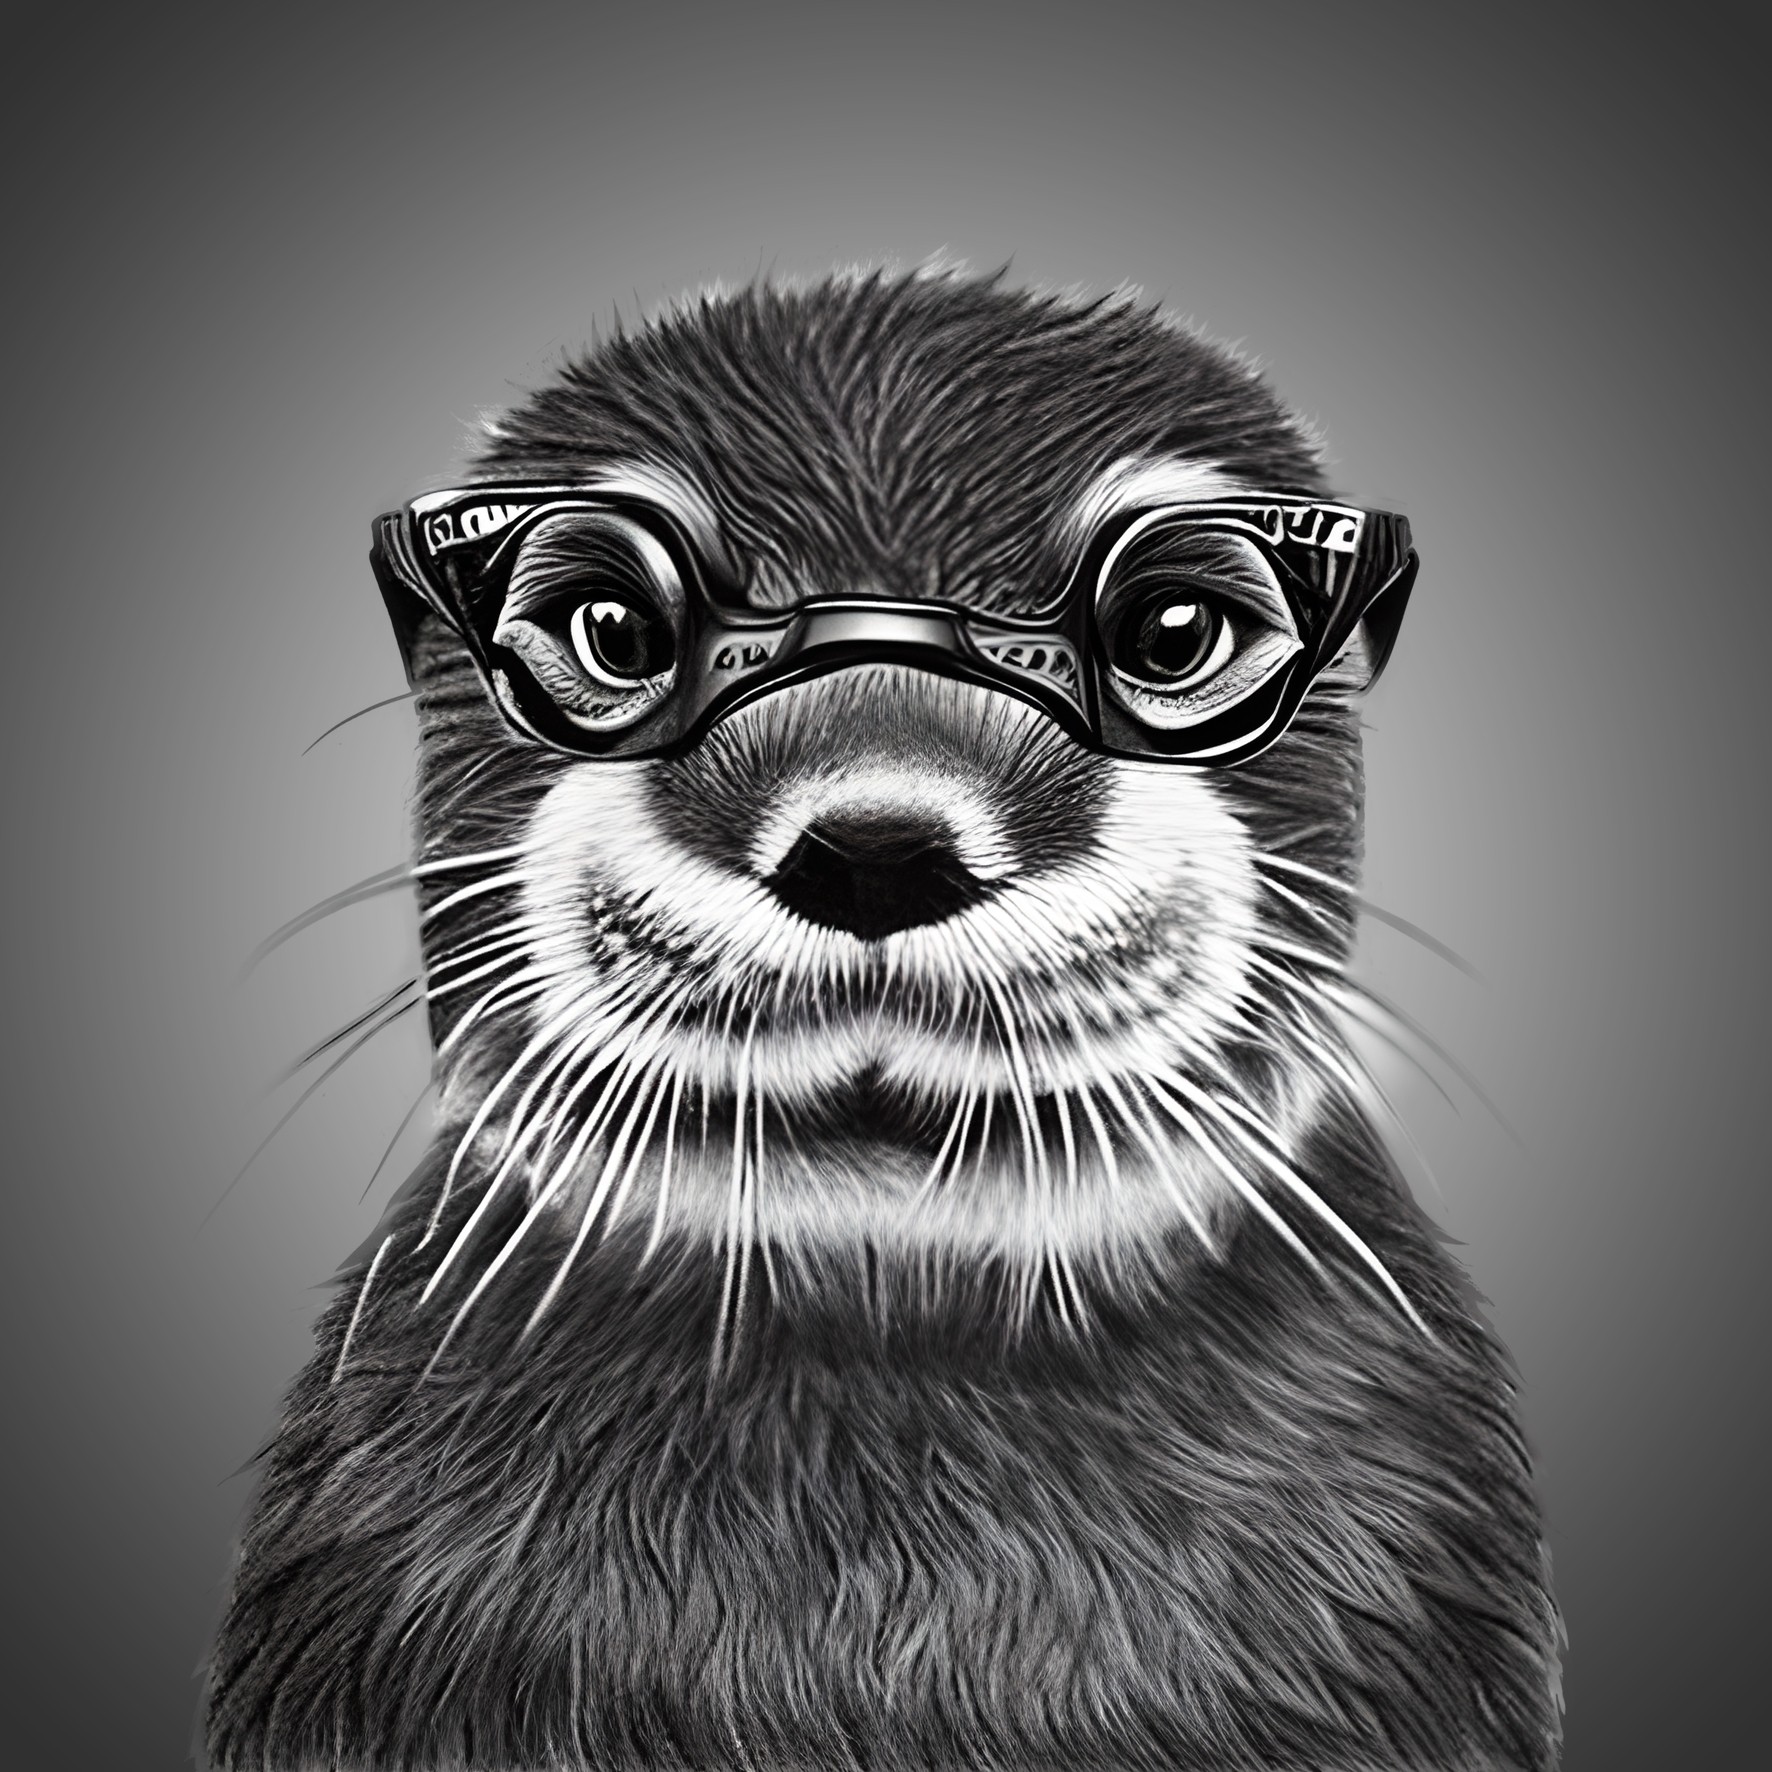 Otter Funny Black and White Art Blank Card (Spexy Beast)